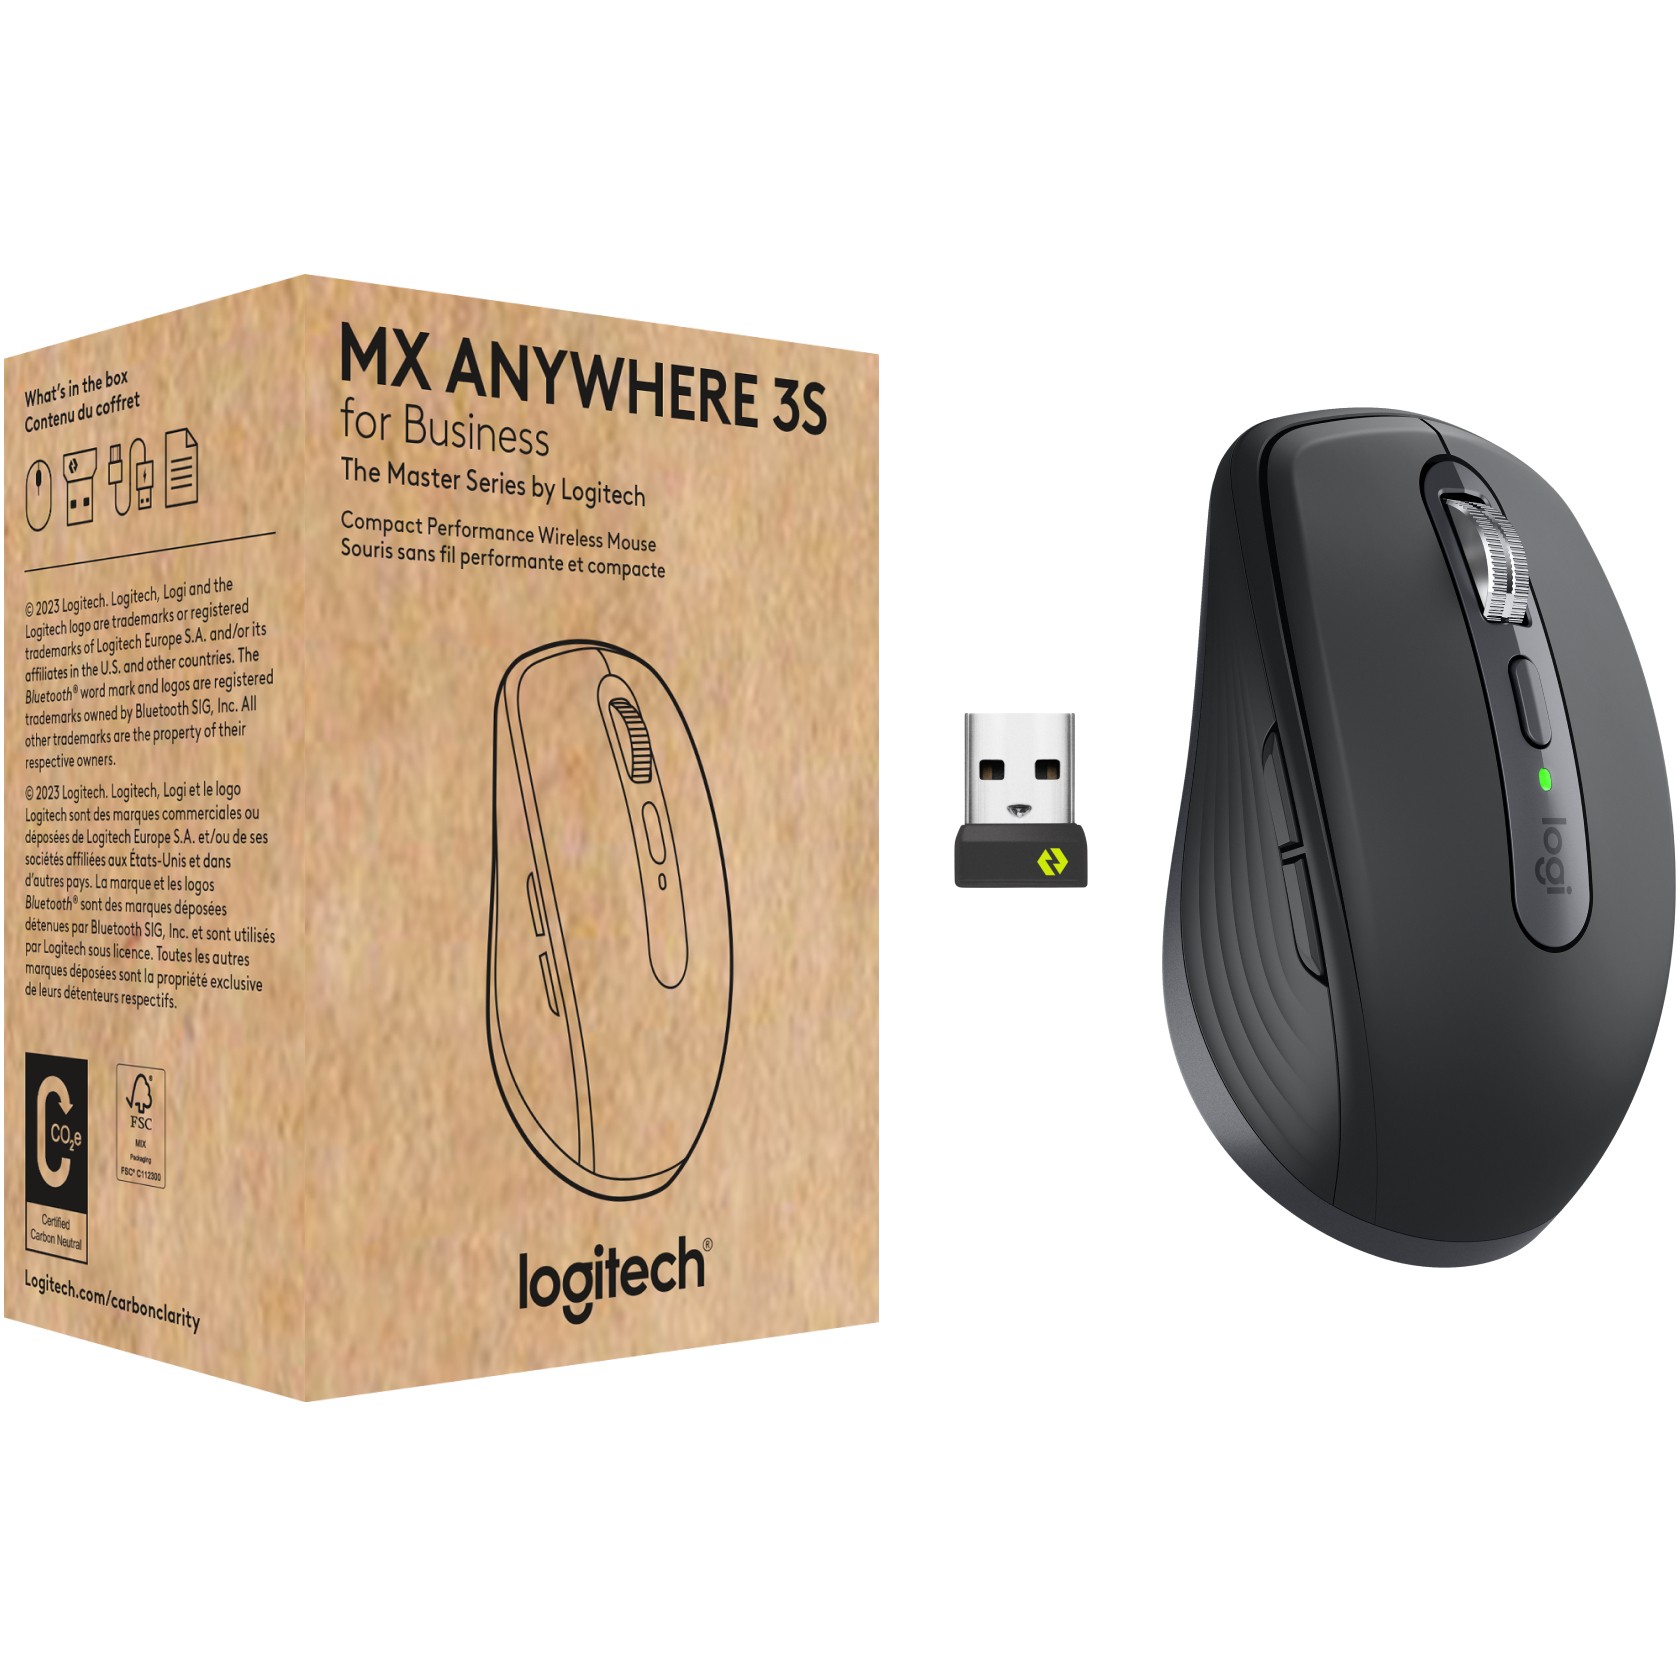 Logitech MX Anywhere 3S for Business mouse - 910-006958